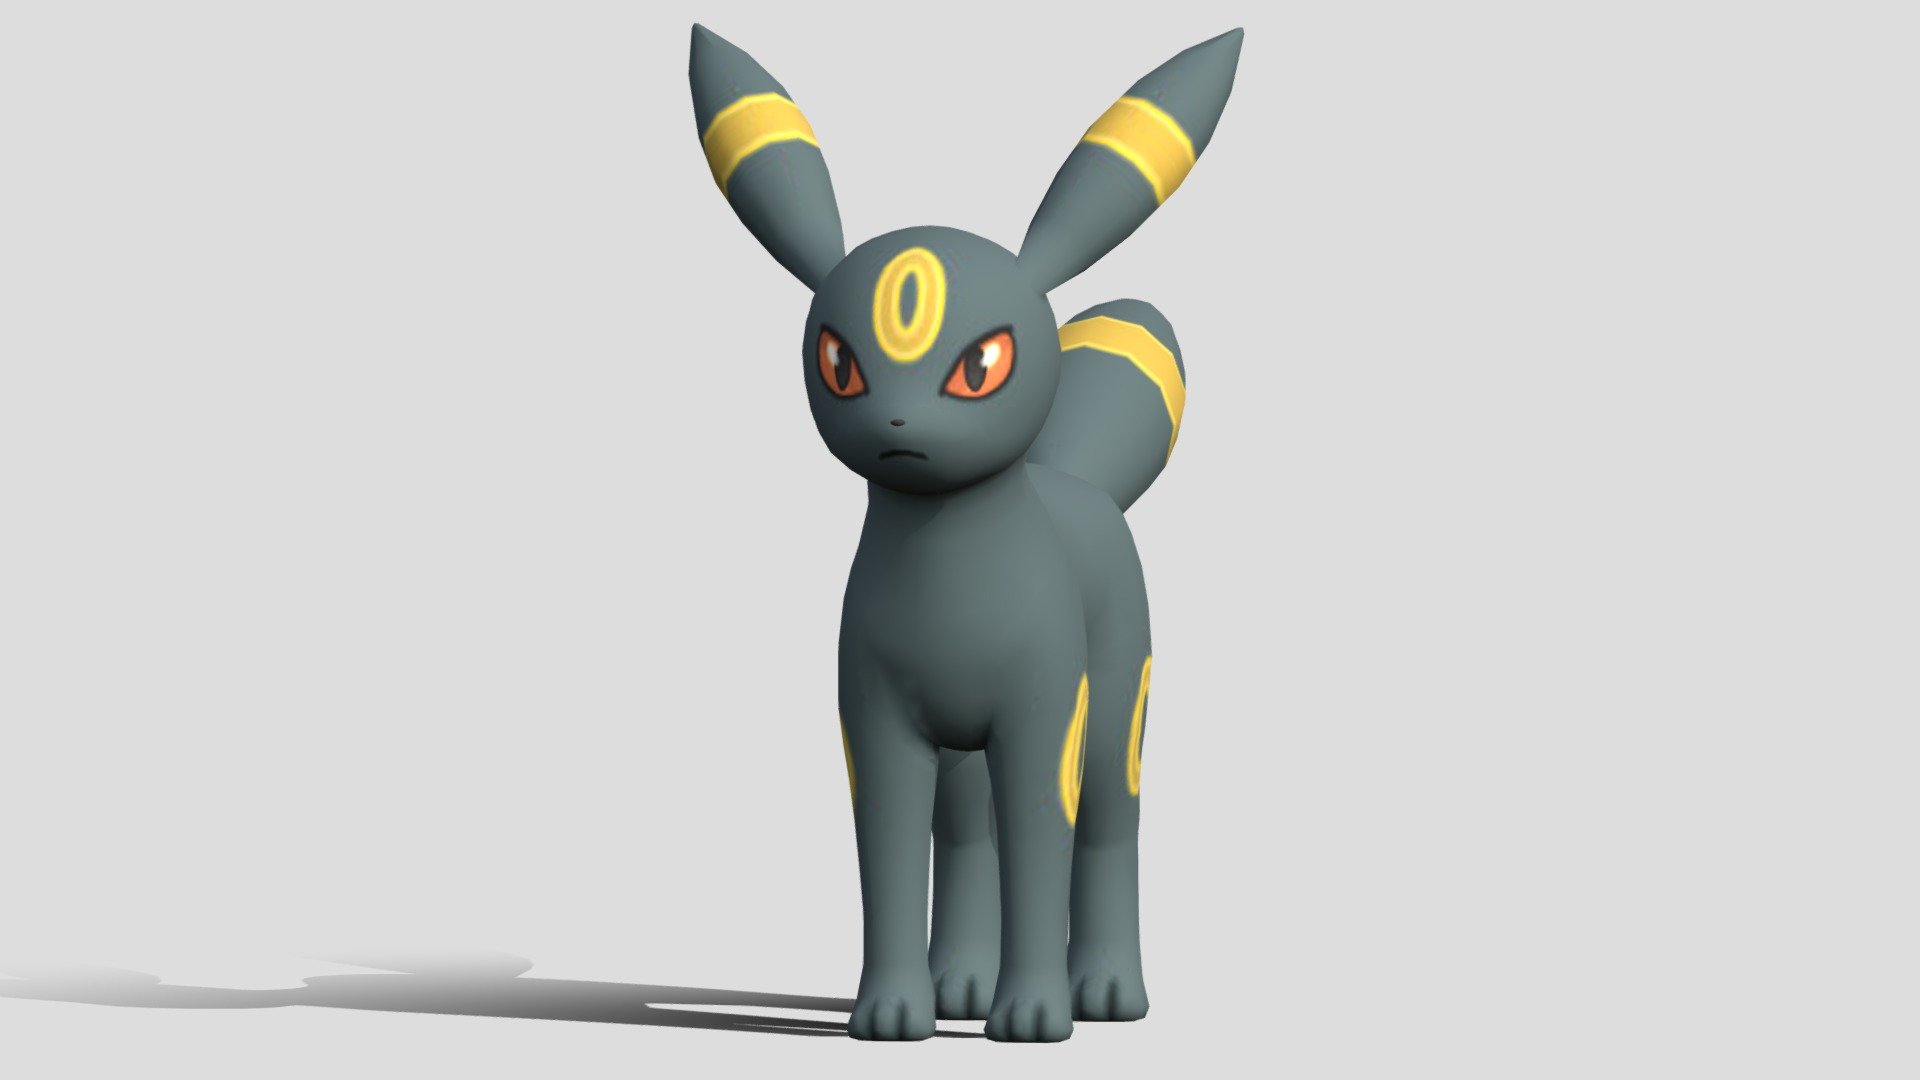 Umbreon is a mammalian Pokémon which has a sleek, black body with four slender legs and crimson eyes. It has two pairs of pointed teeth (one pair in each jaw) which are visible when its mouth is open. It has long, pointed ears and a bushy tail, each with a yellow band around them. Its forehead and legs have yellow rings on them.

Umbreon's evolution is the result of Eevee being exposed to the moonlight, which altered its genetic structure. Umbreon's yellow rings glow when it is excited, such as when it leaps to attack; or when exposed to the moon's aura, which fills it with a mysterious energy. Umbreon hunts at night and, as such, has well-developed eyes that can spot a prey even in darkness. Its black fur helps it blend into the night while waiting for the right moment to pounce. When it does, its rings emit a dim yet ominous glow, and it lunges for the prey's throat before eating 3d model